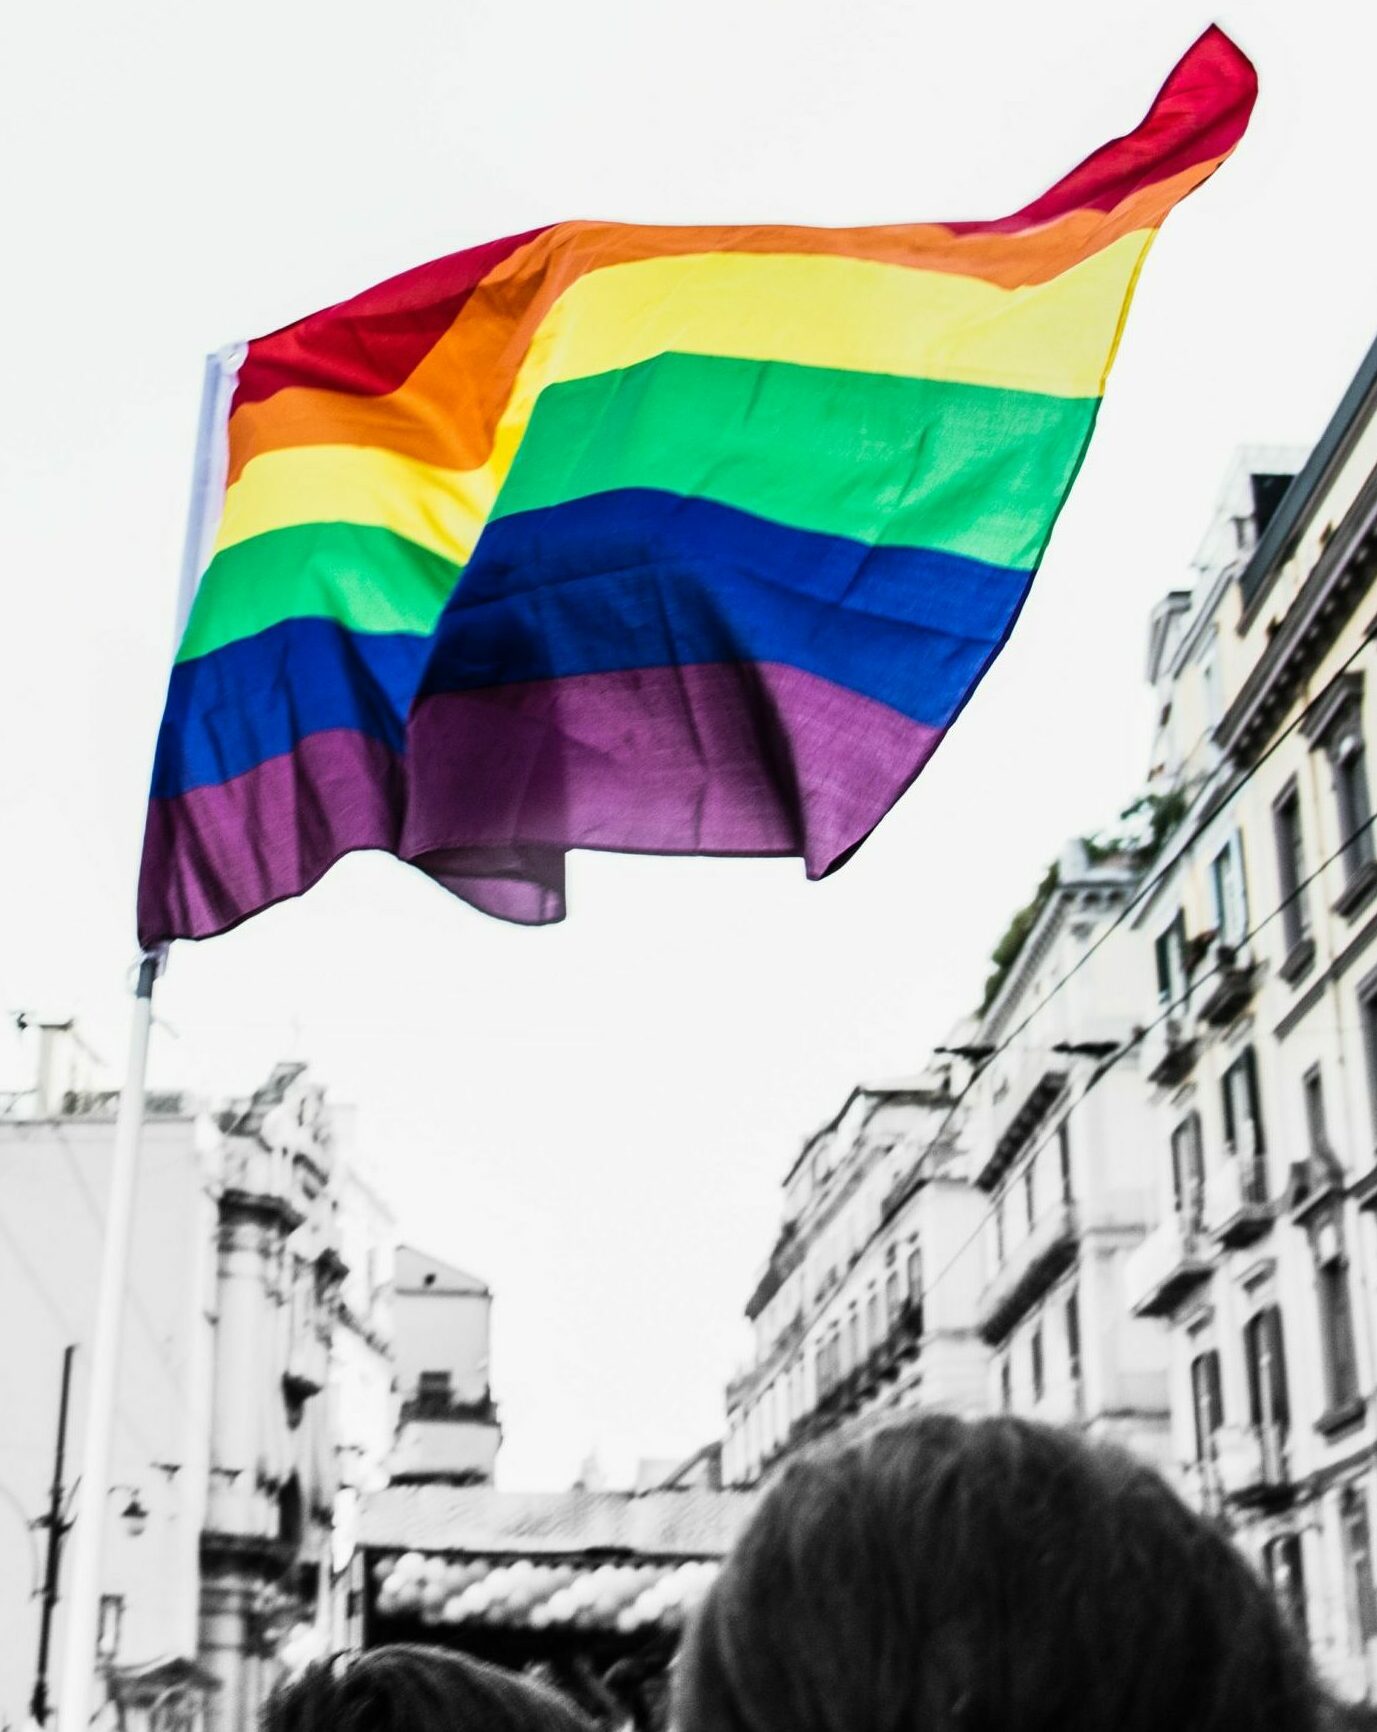 A pride flag waving above a crowd in a city street.